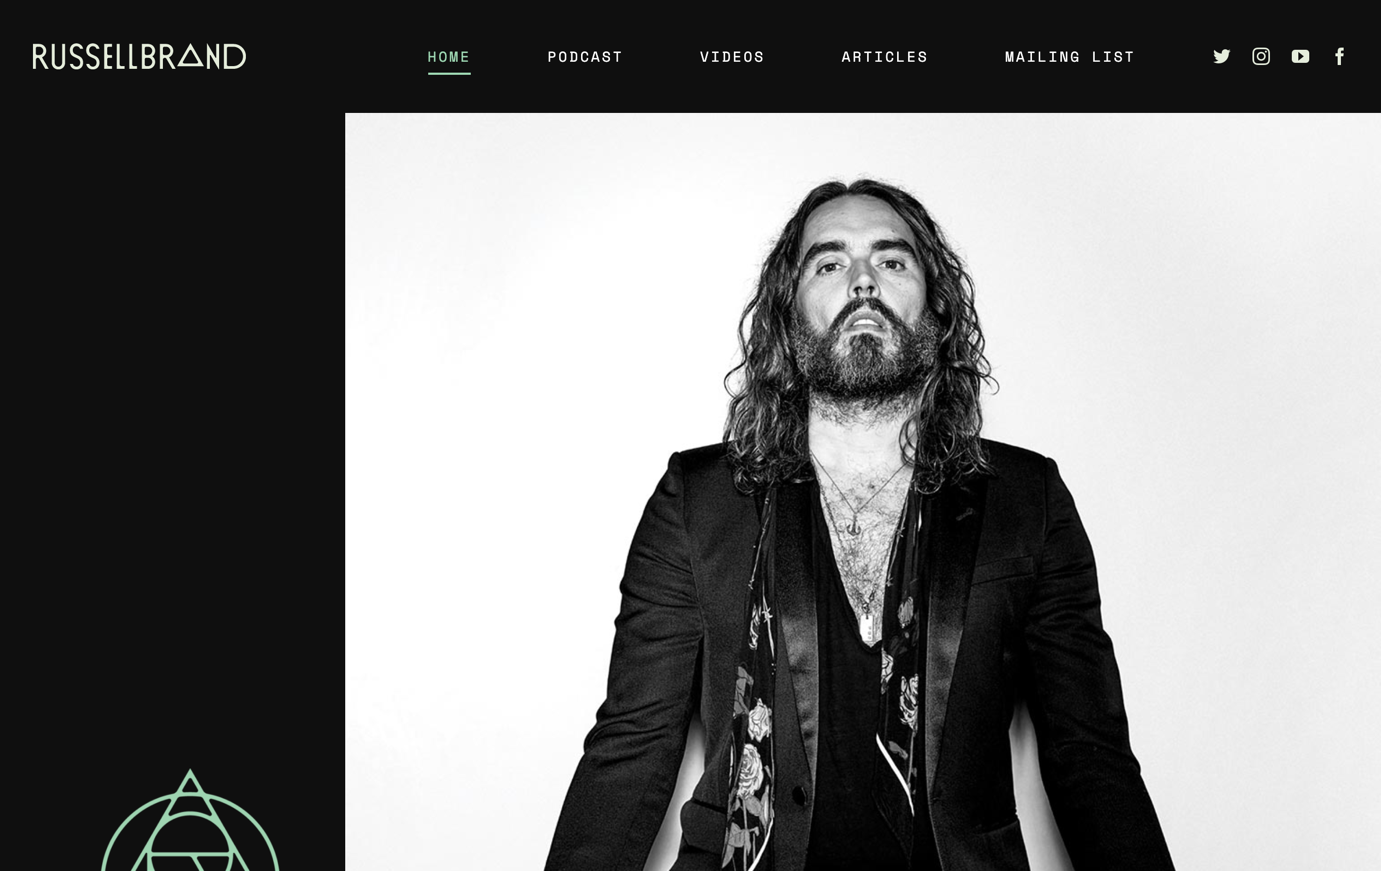 russell brand - celebrity websites powered by wordpress